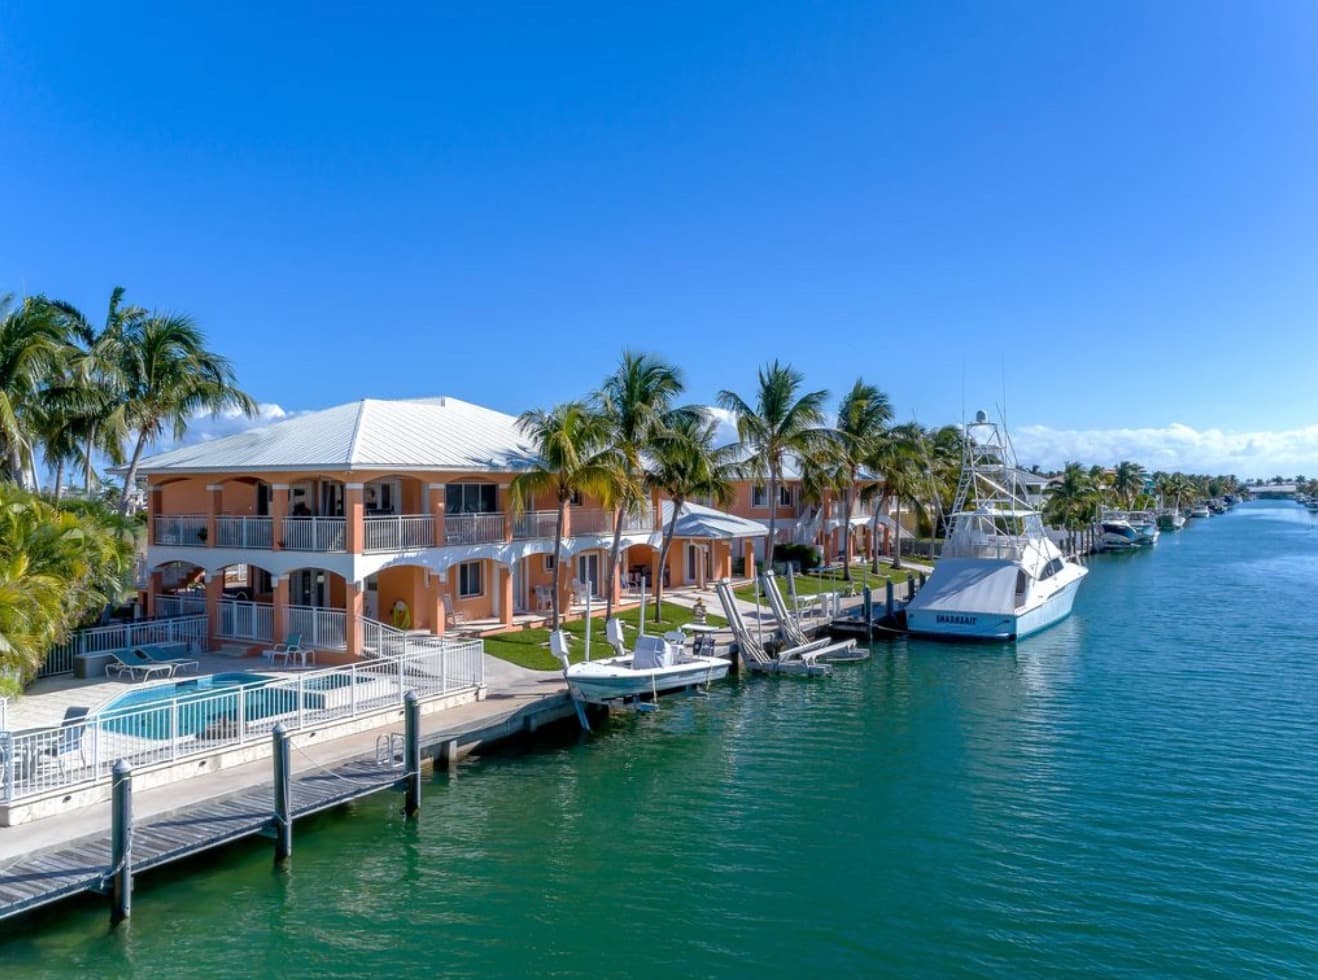 How To Find a Vacation Rental With Private Boat Docks too!